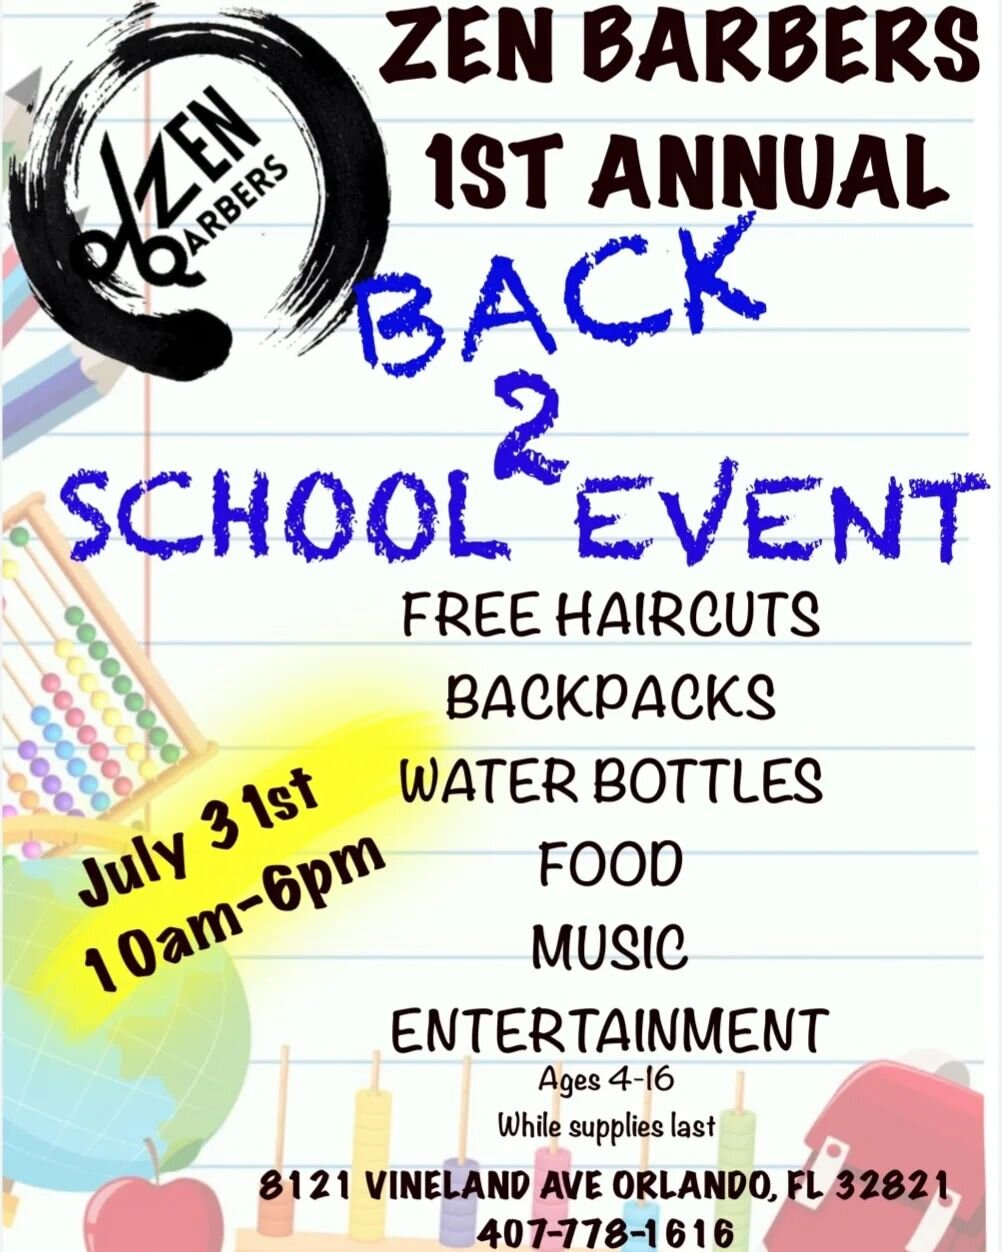 Zen Barbers will be having our FIRST ANNUAL back to school event!!! 

Sunday July 31st. 

Zen Barbers
8121 Vineland Ave
Orlando, FL 32821
407-778-1616 

If you are in our area or have any supplies you would like to donate please stop by to see us. 

